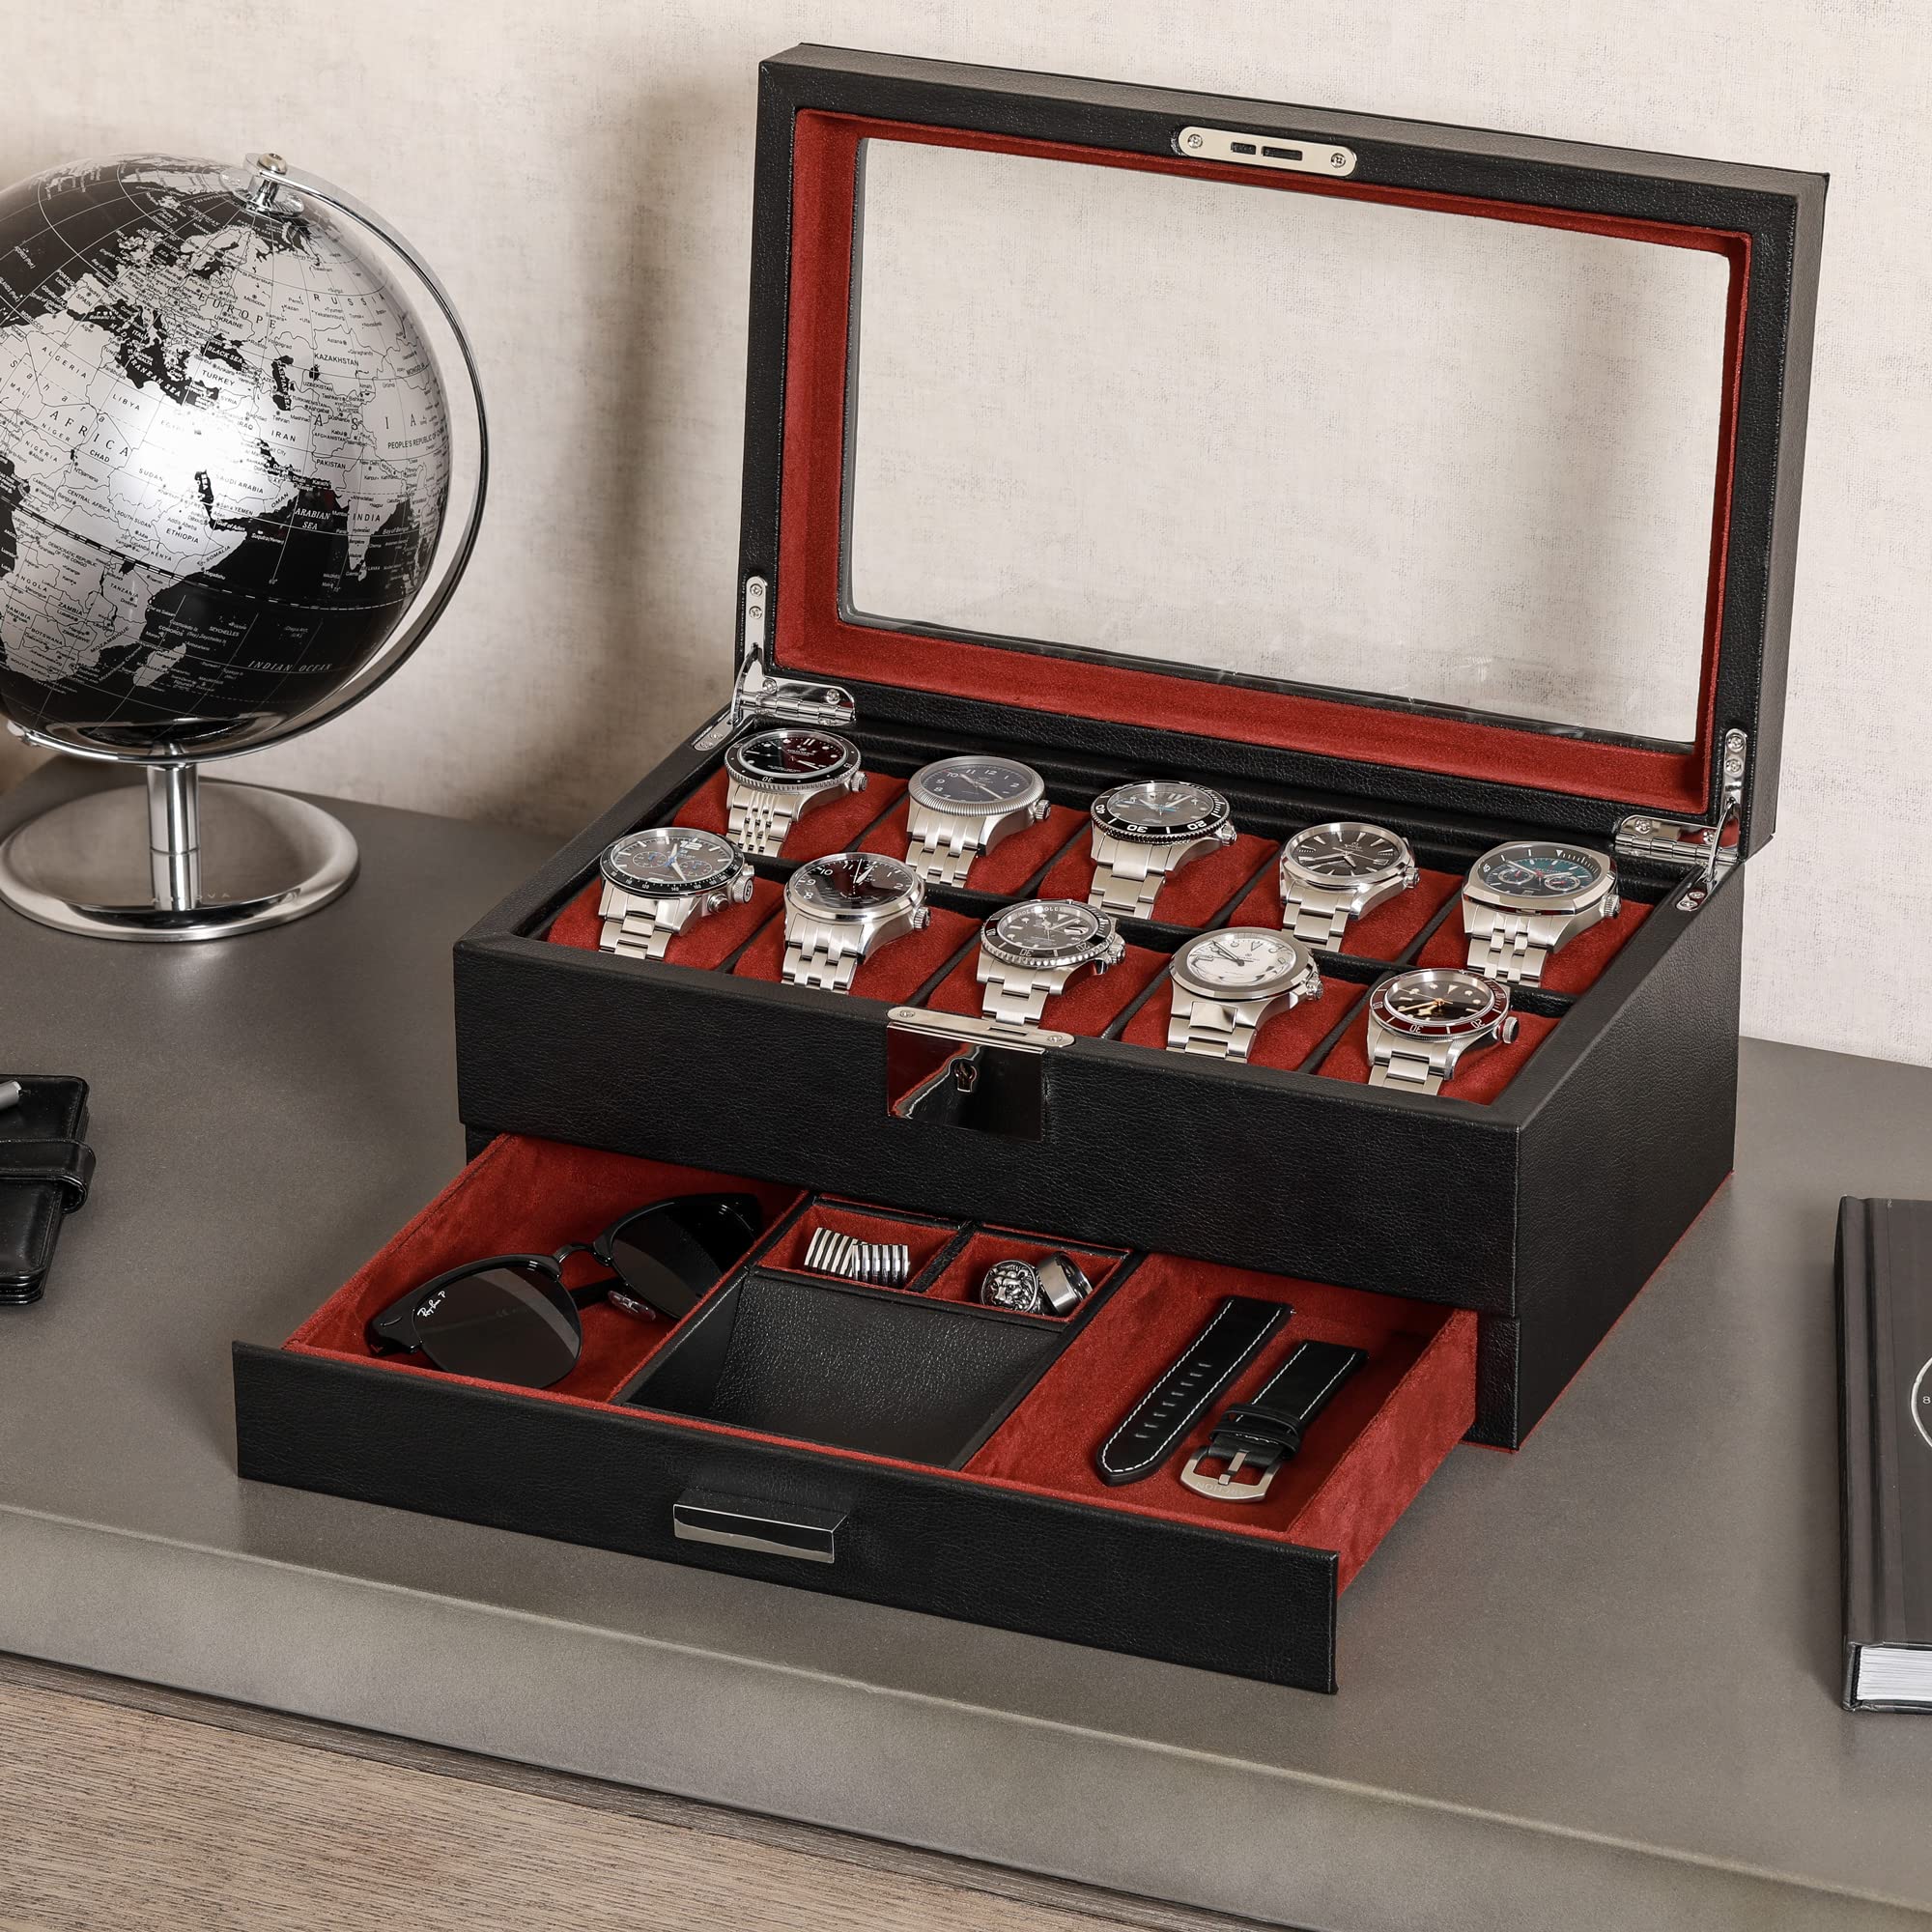 Gift Set 10 Slot Leather Watch Box with Valet Drawer & Matching 5 Watch Travel Case - Luxury Watch Case Display Organizer, Locking Mens Jewelry Watches Holder, Men's Storage Boxes Glass Top Black/Red